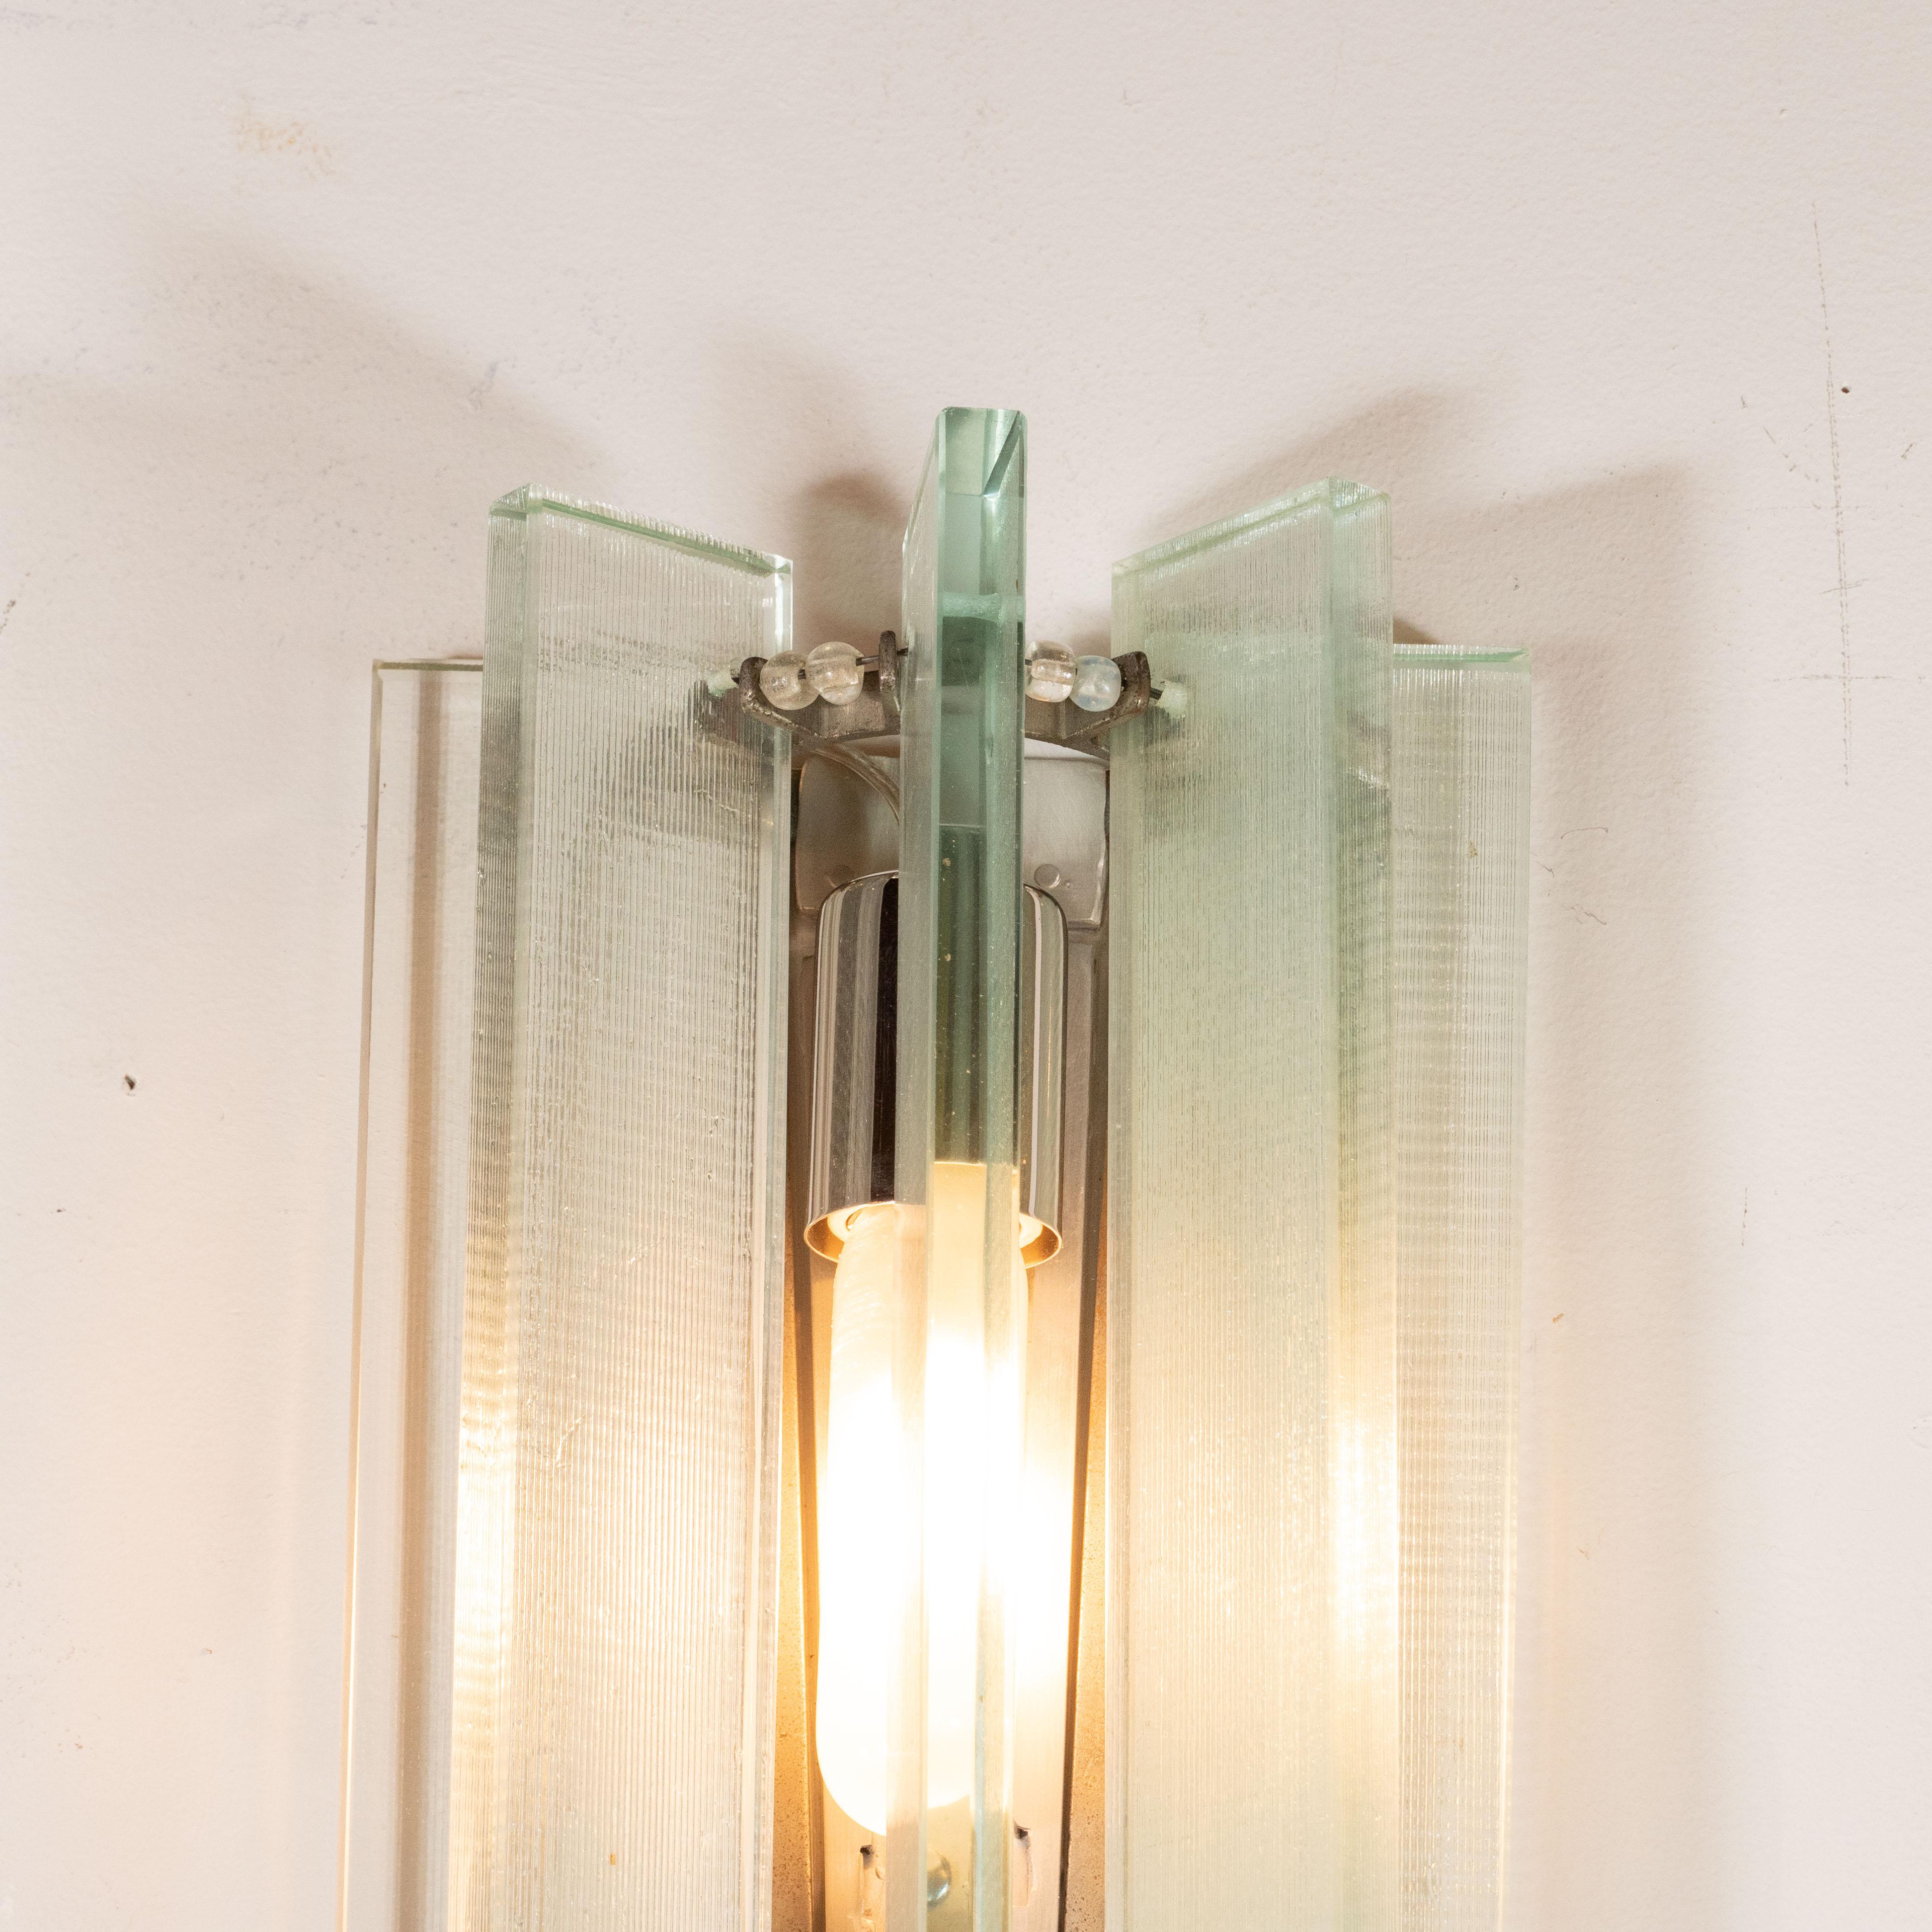 Mid-20th Century Mid-Century Modern Glass & Antique Nickel Sconces in the Manner of Fontana Arte